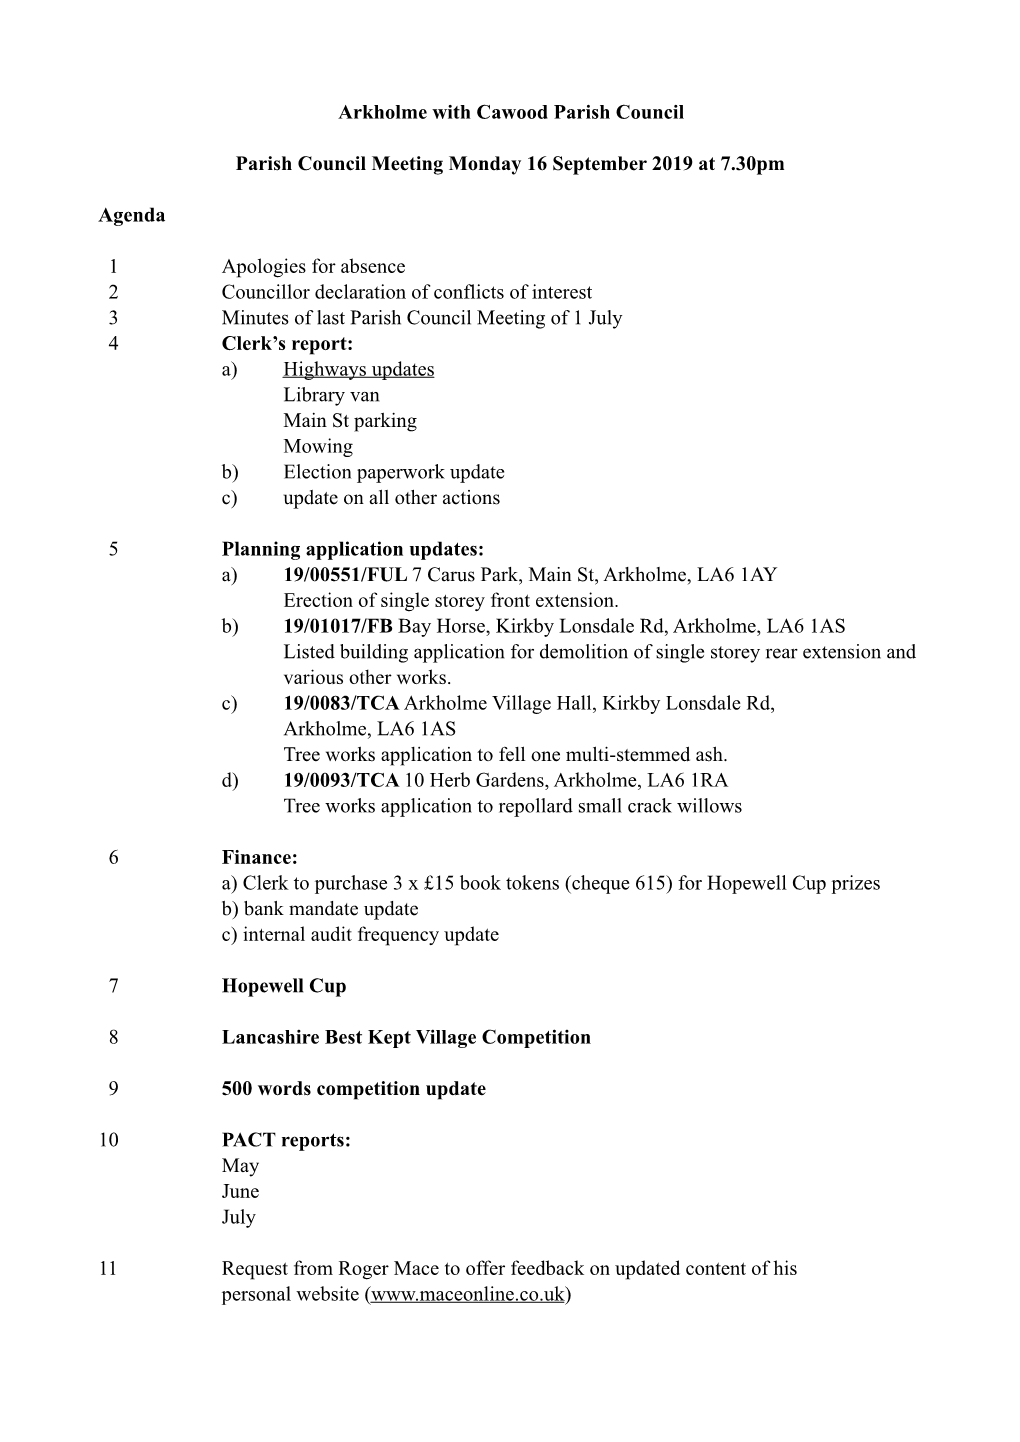 Arkholme with Cawood Parish Council Agenda